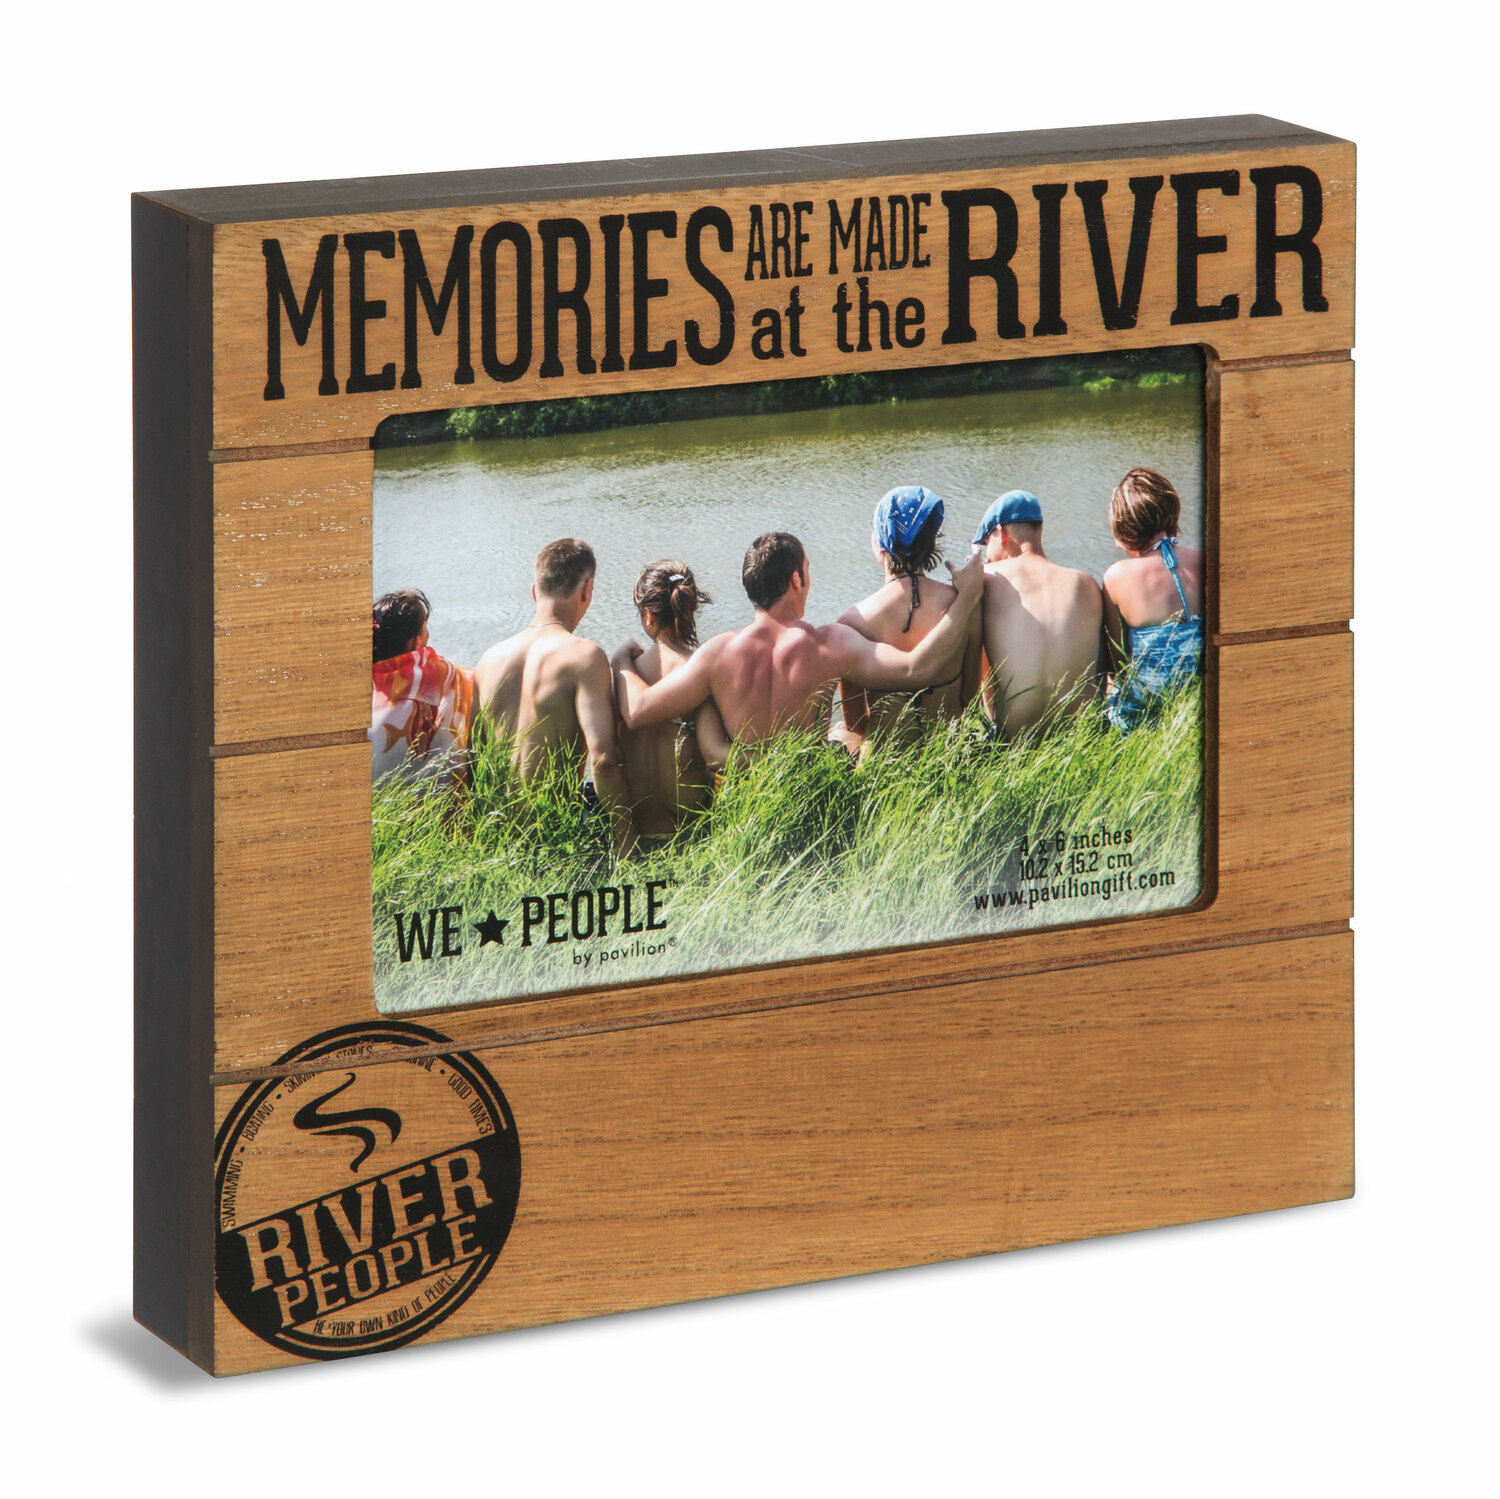 River People by We People - River People - 6.75" x 7.5" Frame (Holds 4" x 6" Photo)